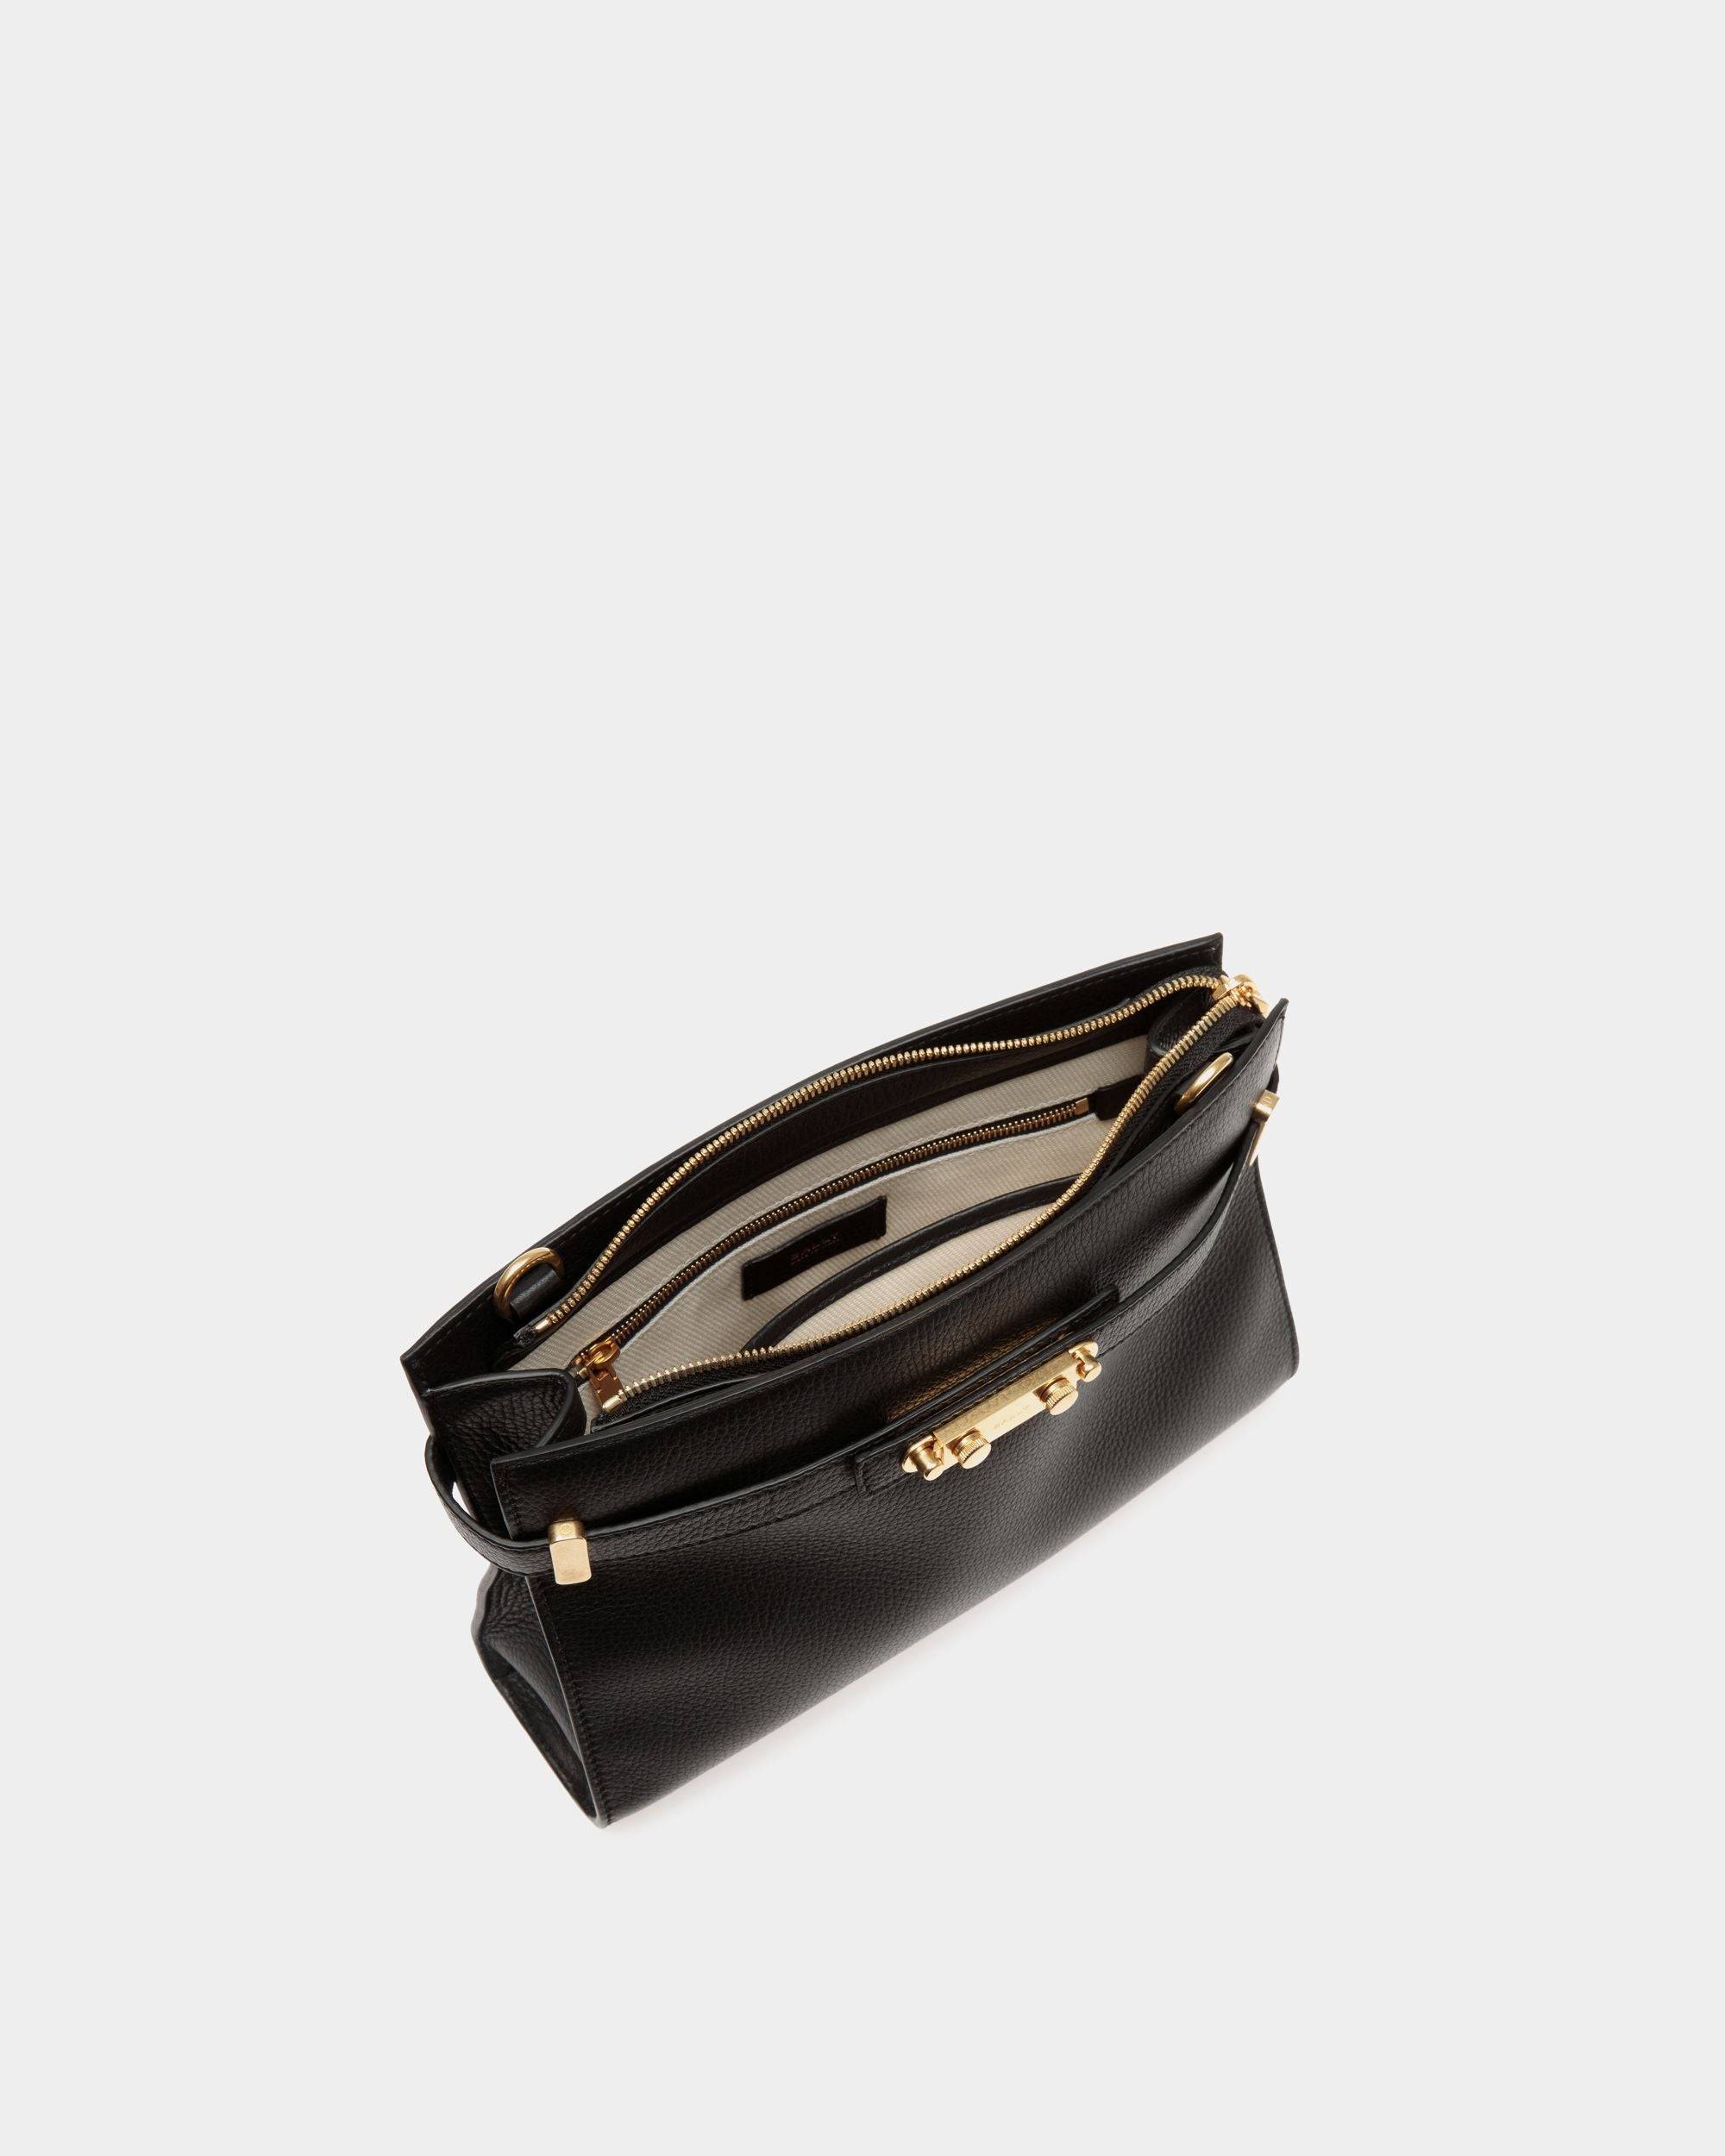 Carriage | Women's Shoulder Bag in Black Grained Leather | Bally | Still Life Open / Inside